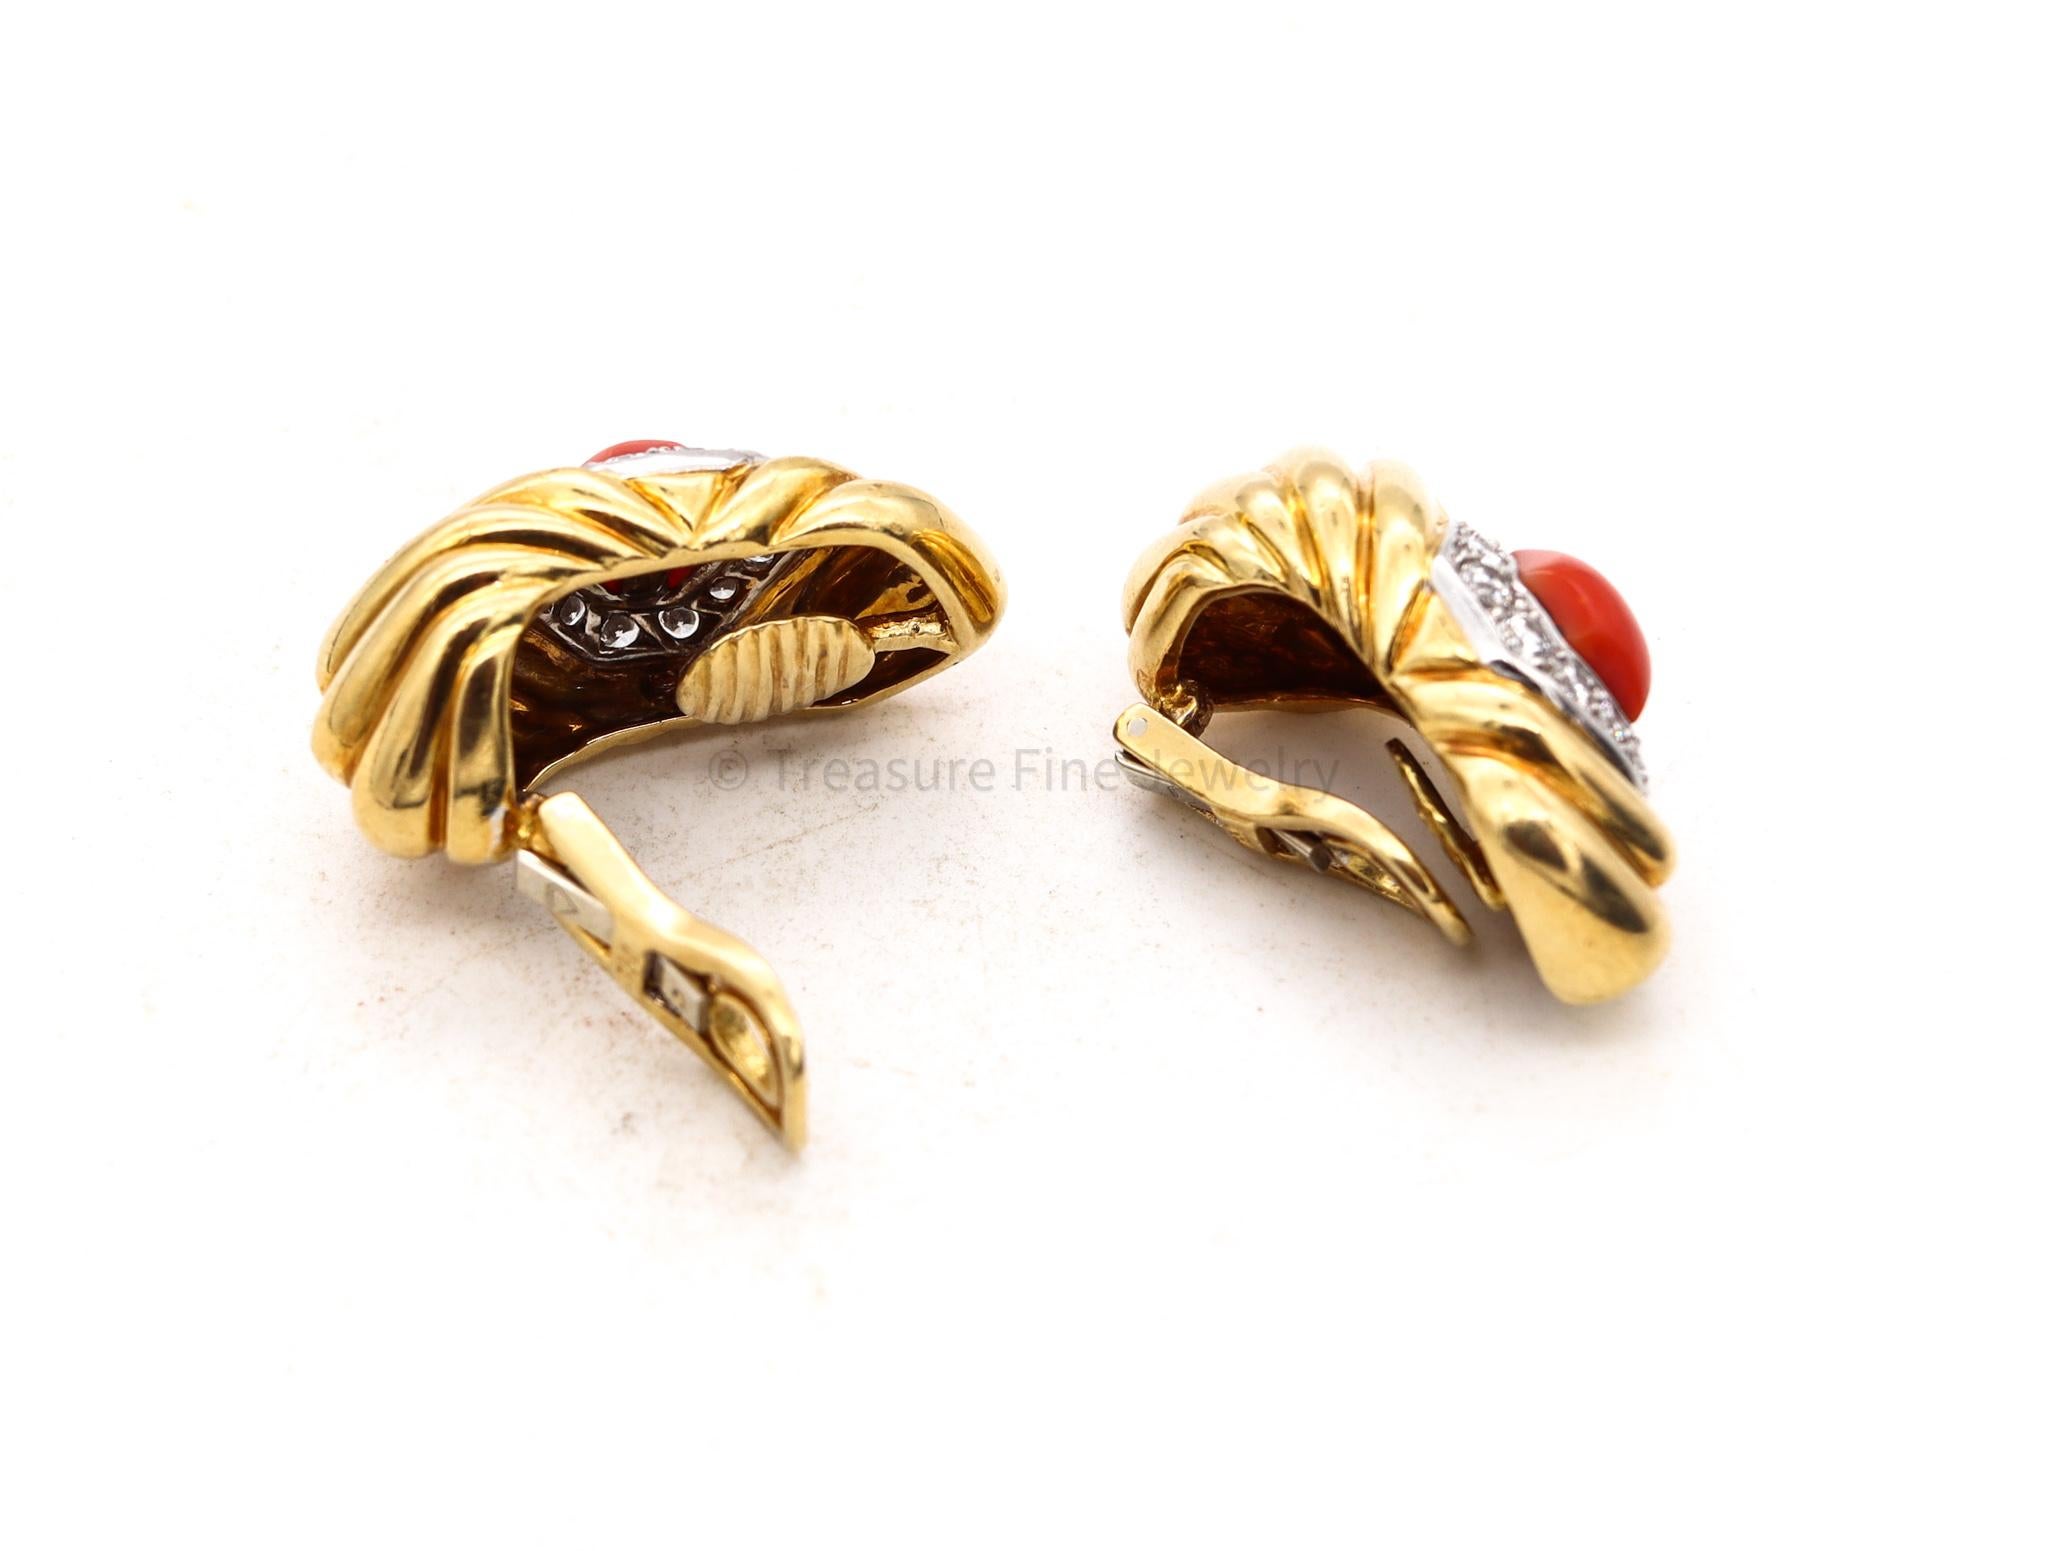 Modernist Charles Turi New York Clip on Earrings 18kt Gold 5.96 Cts in Diamonds and Corals